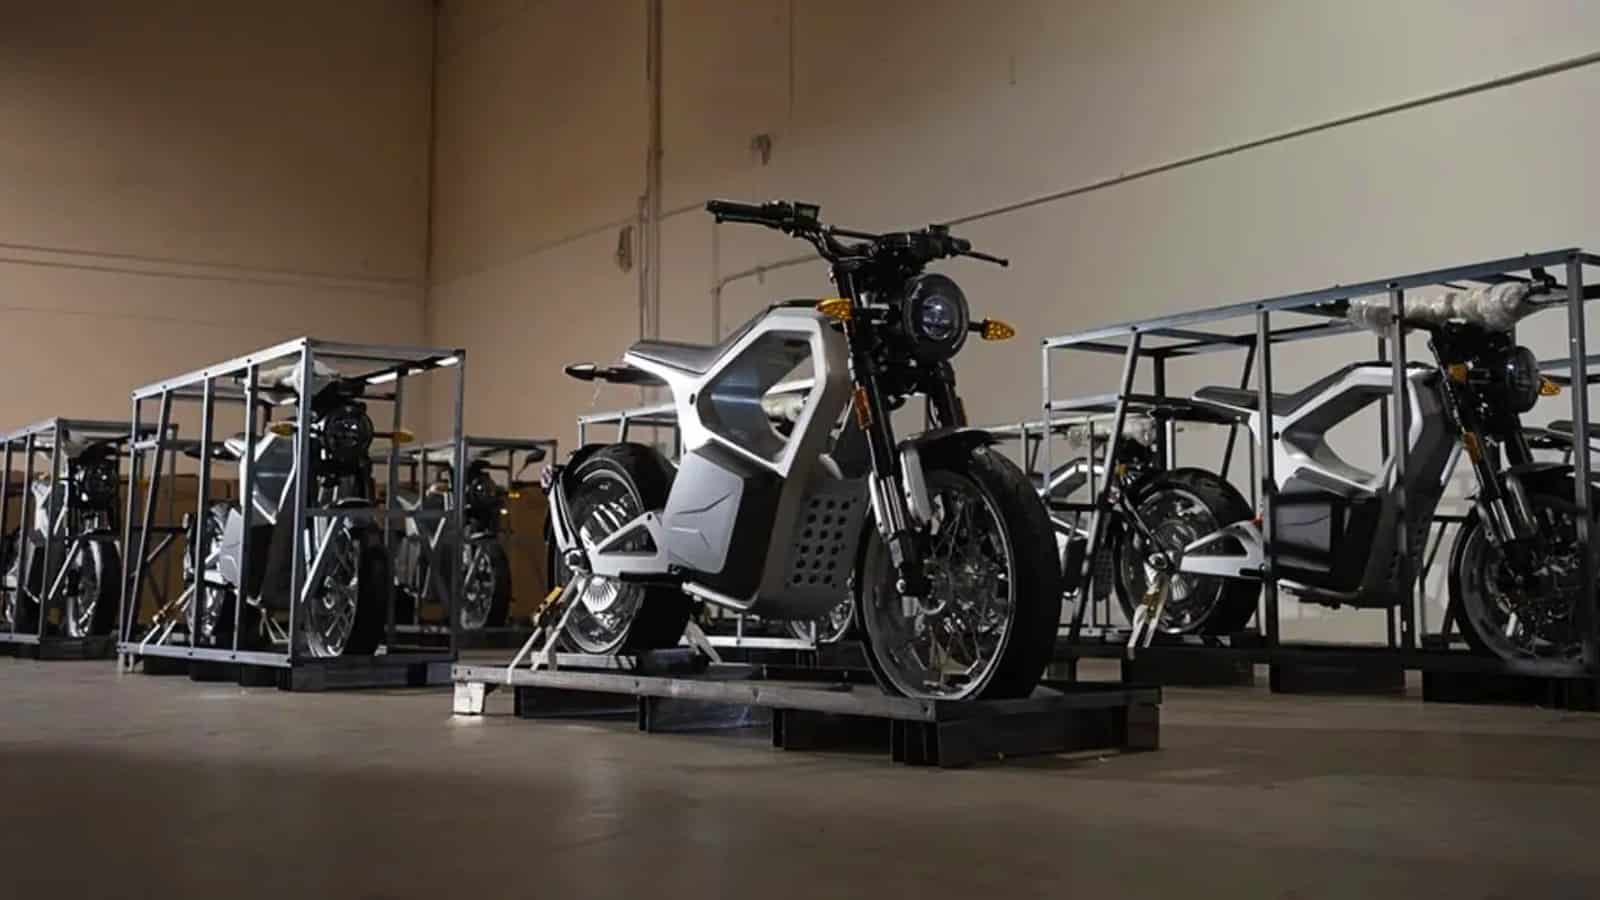 SONDORS prepping its low-cost electric motorcycle for delivery